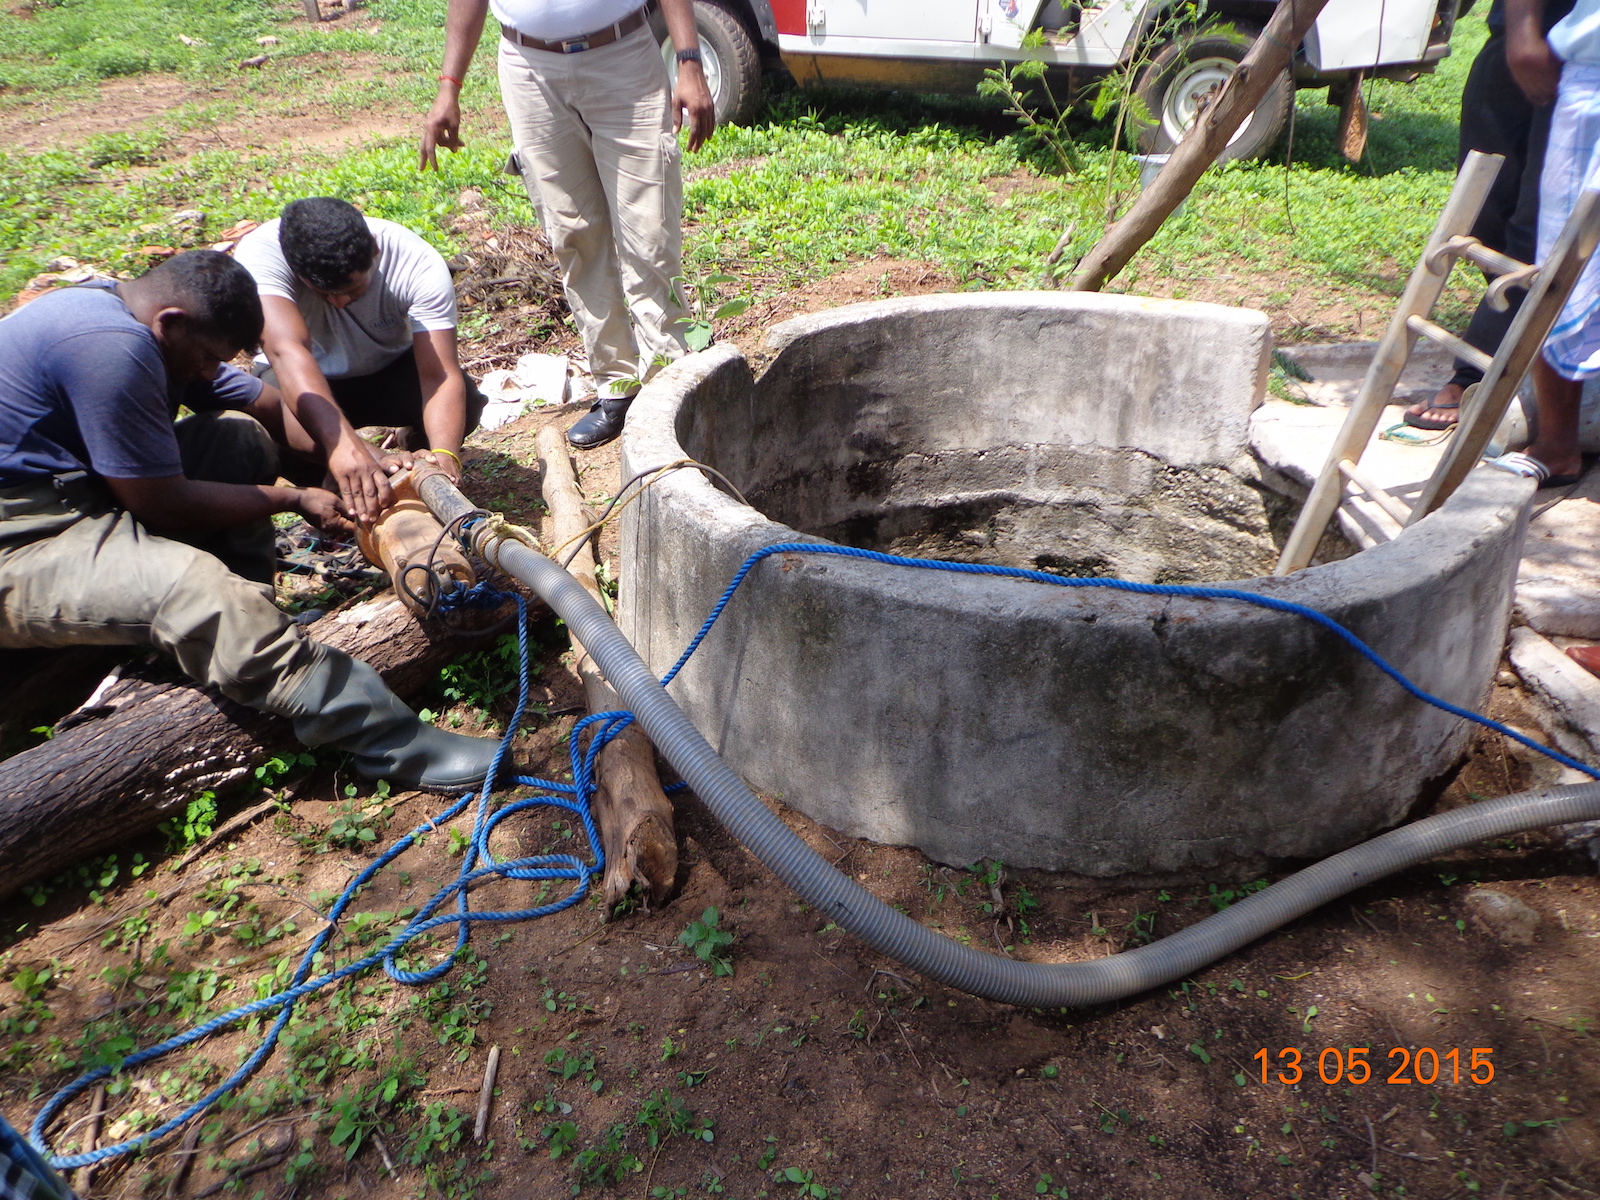 Cleaning of well by Halo Trust